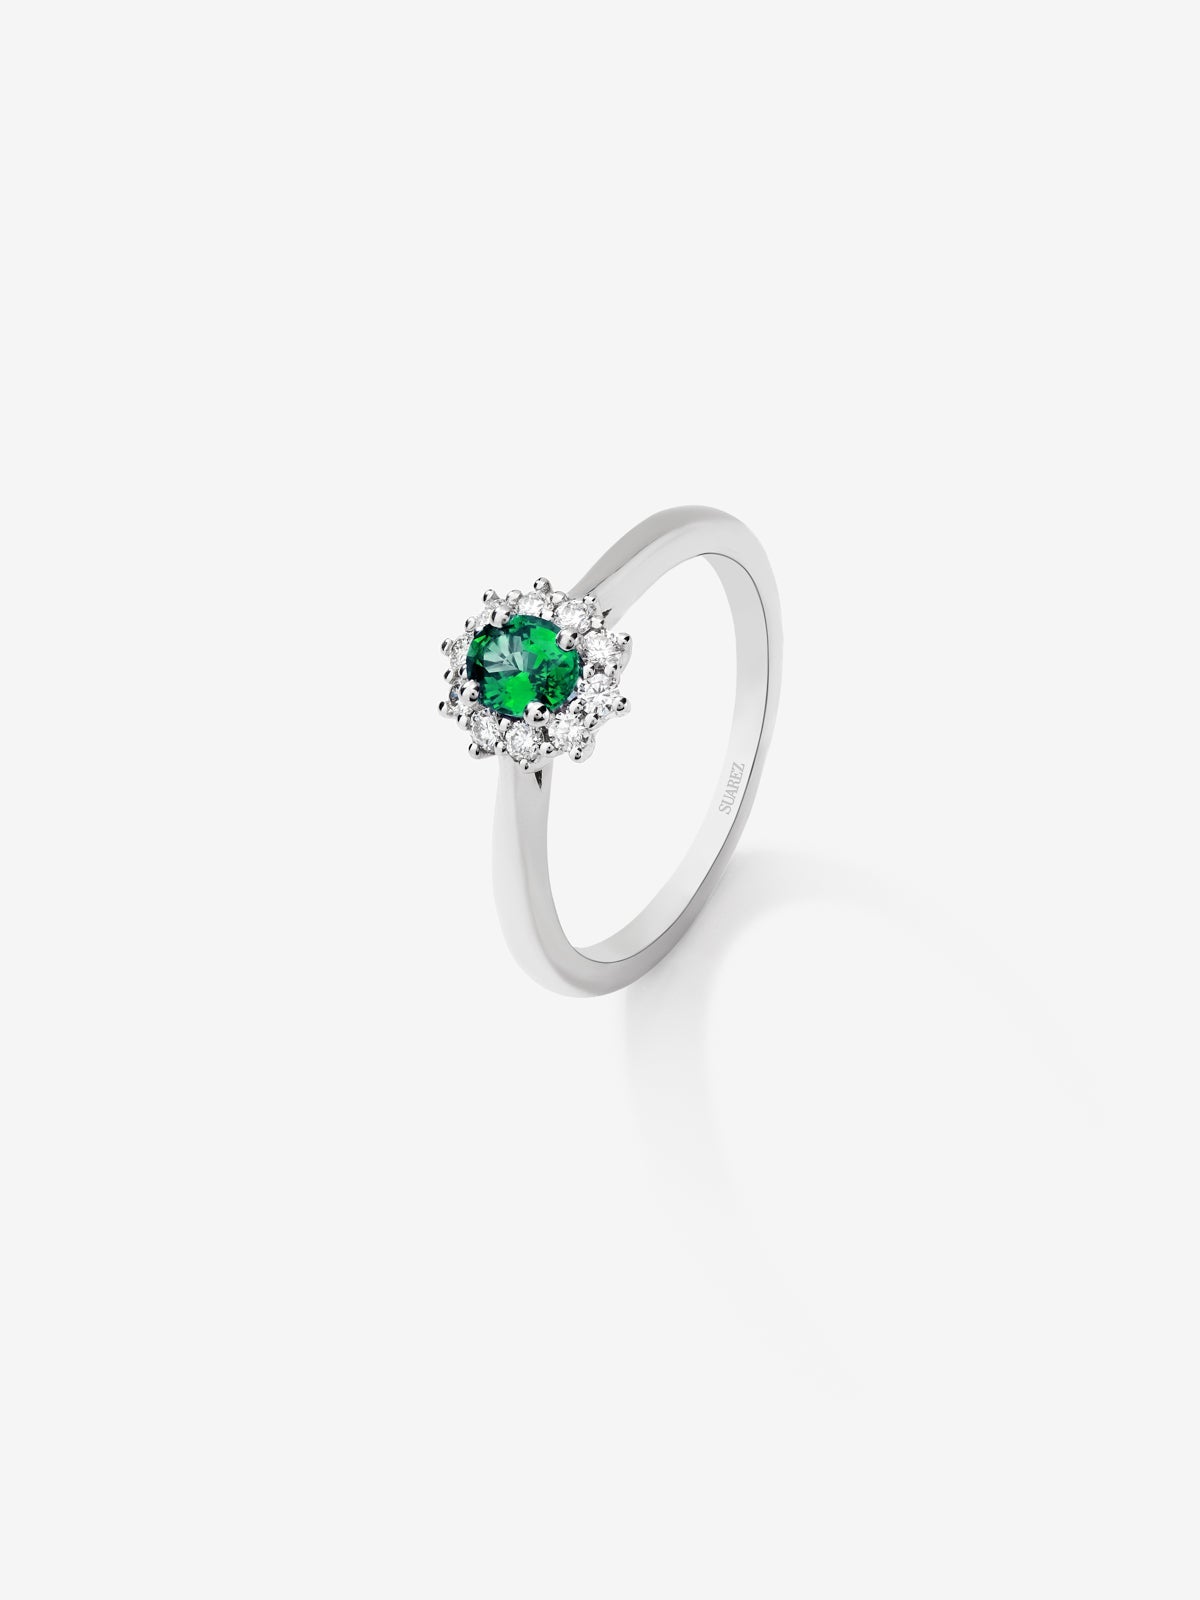 18K white gold ring with oval-cut green emerald of 0.74 cts and 12 brilliant-cut diamonds with a total of 0.25 cts